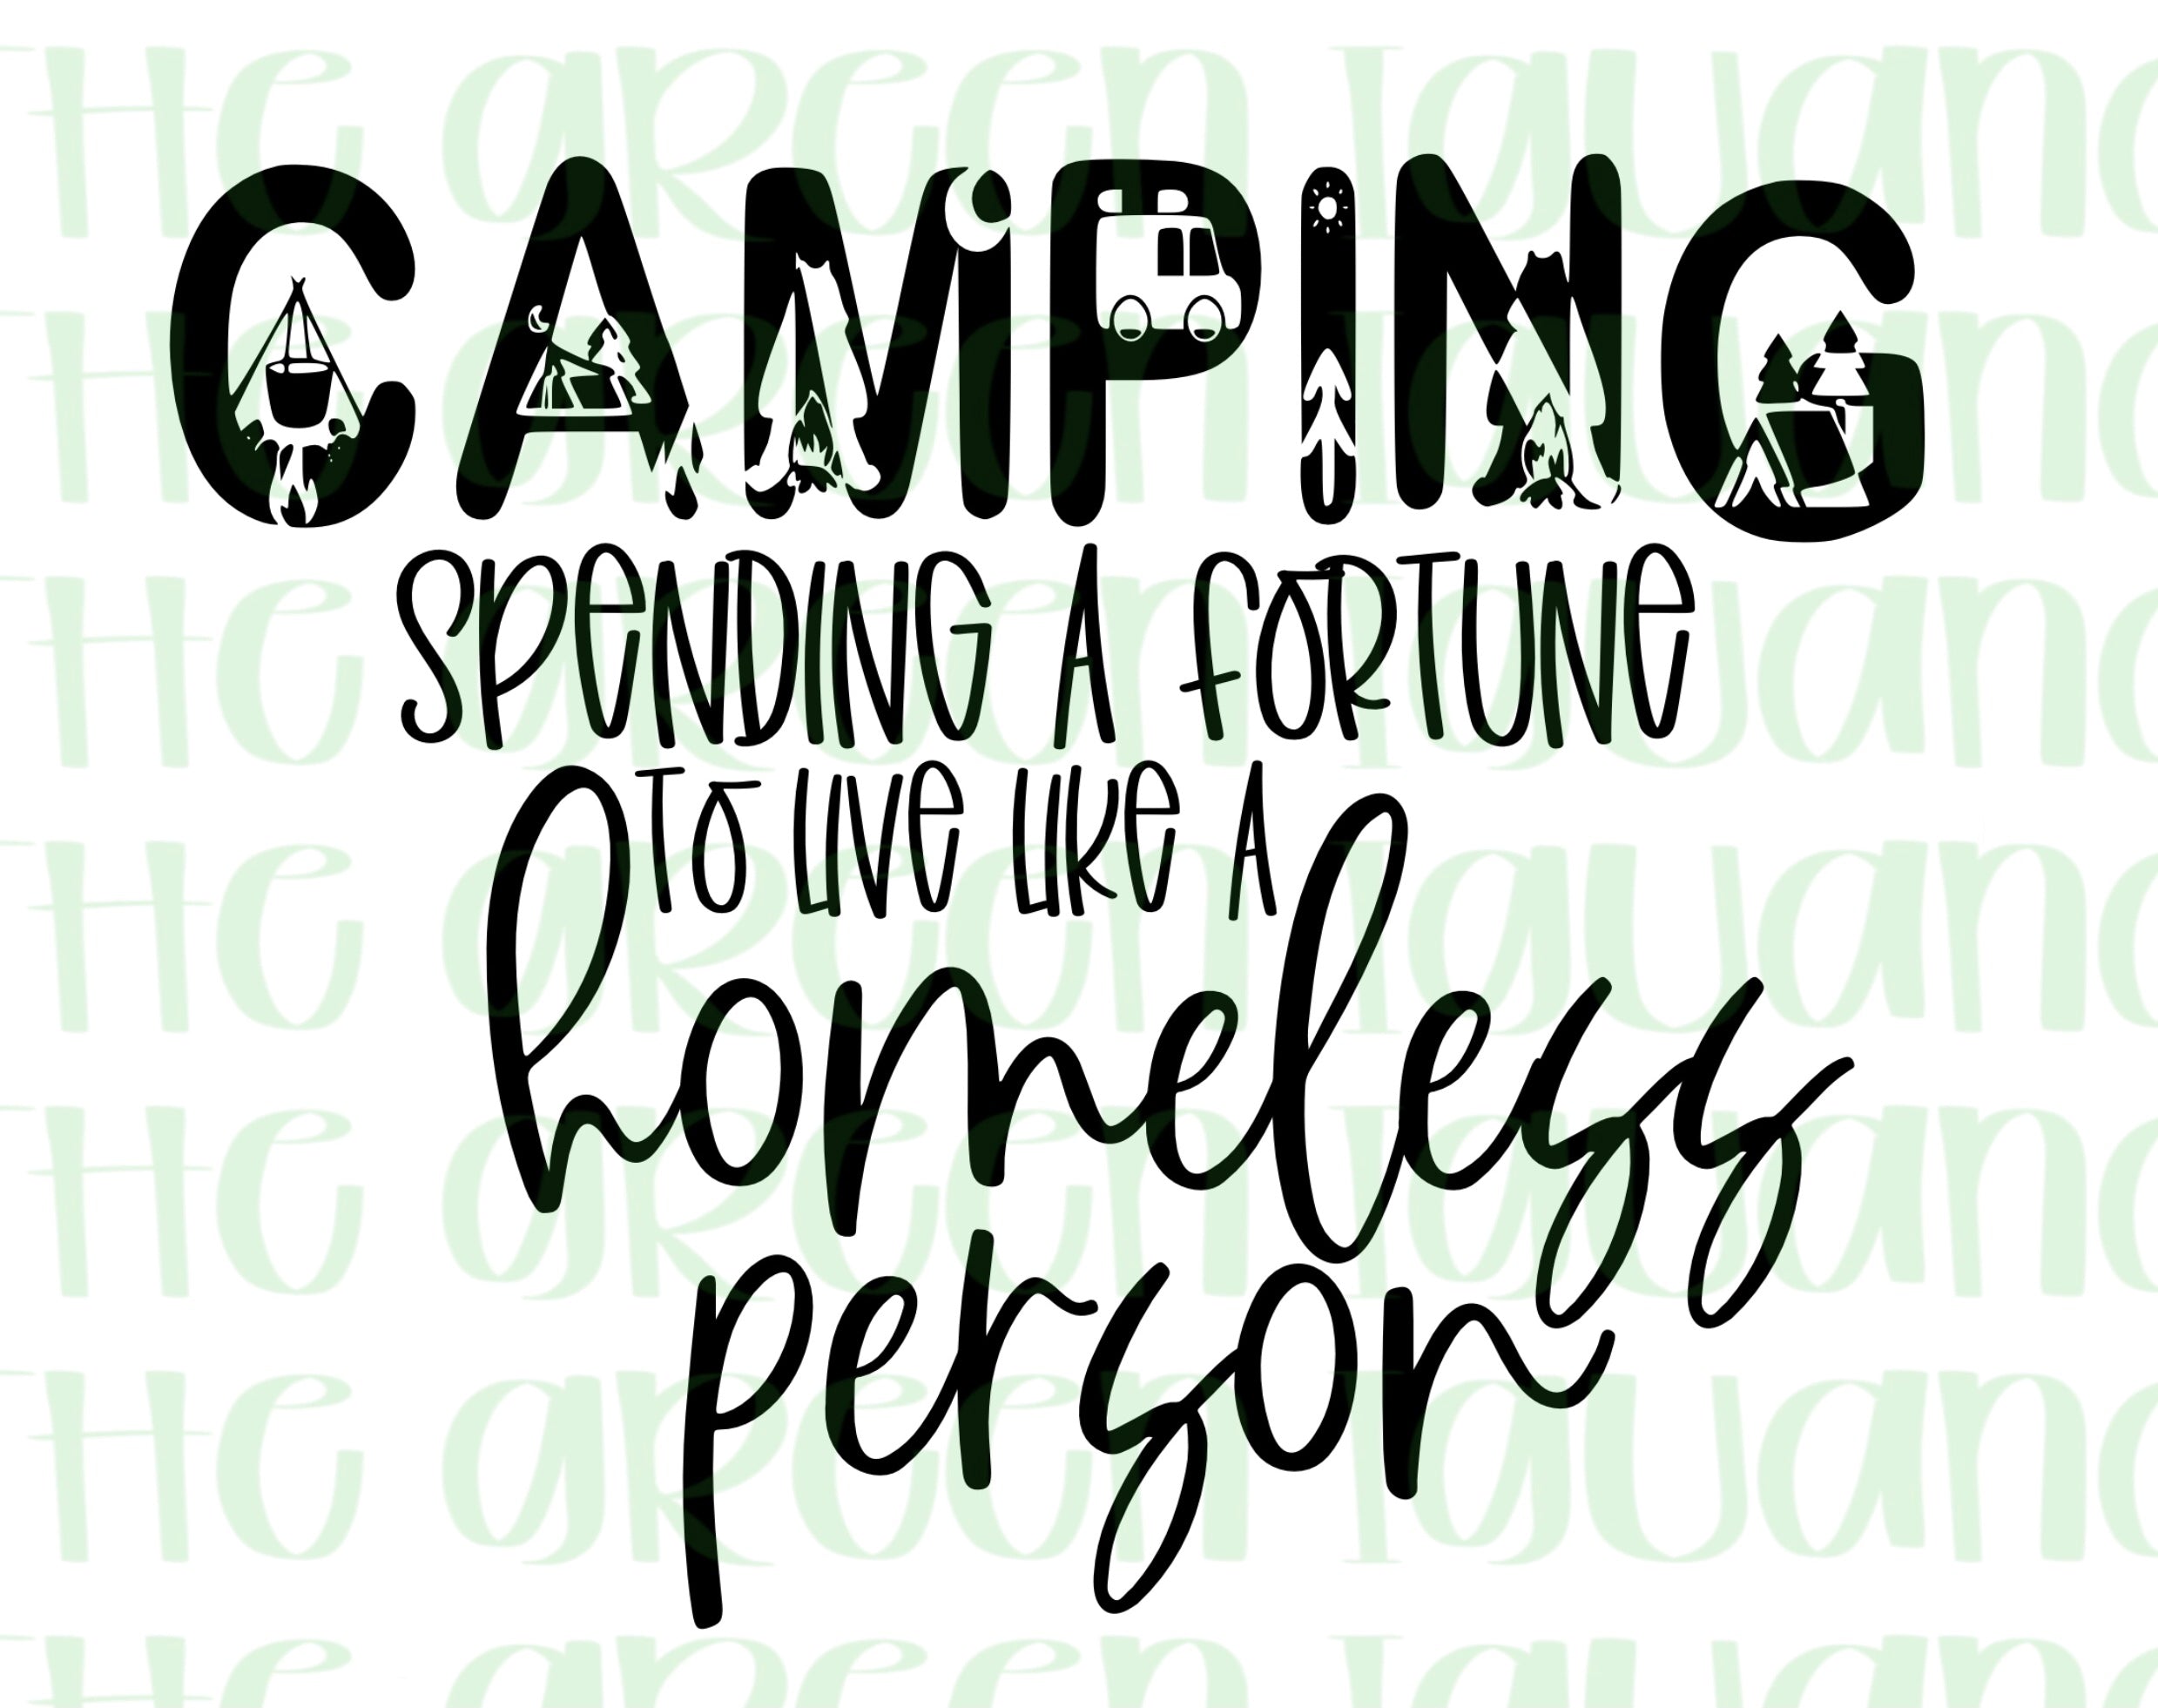 Camping. Spending a fortune to live like a homeless person - DTF transfer